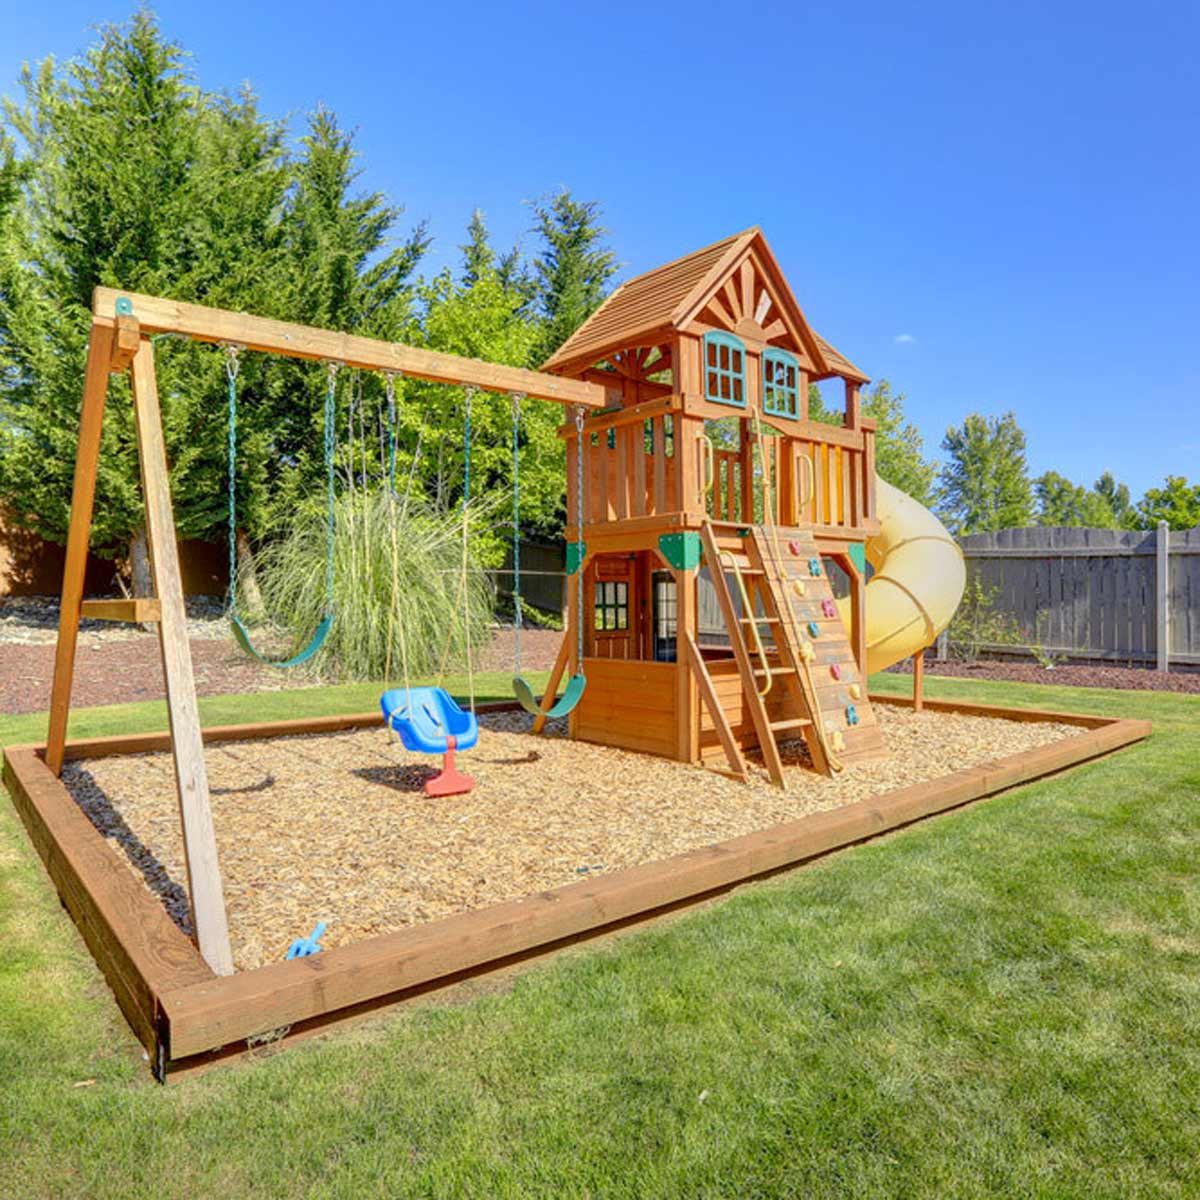 Homeowner's Guide to Home Swing Sets